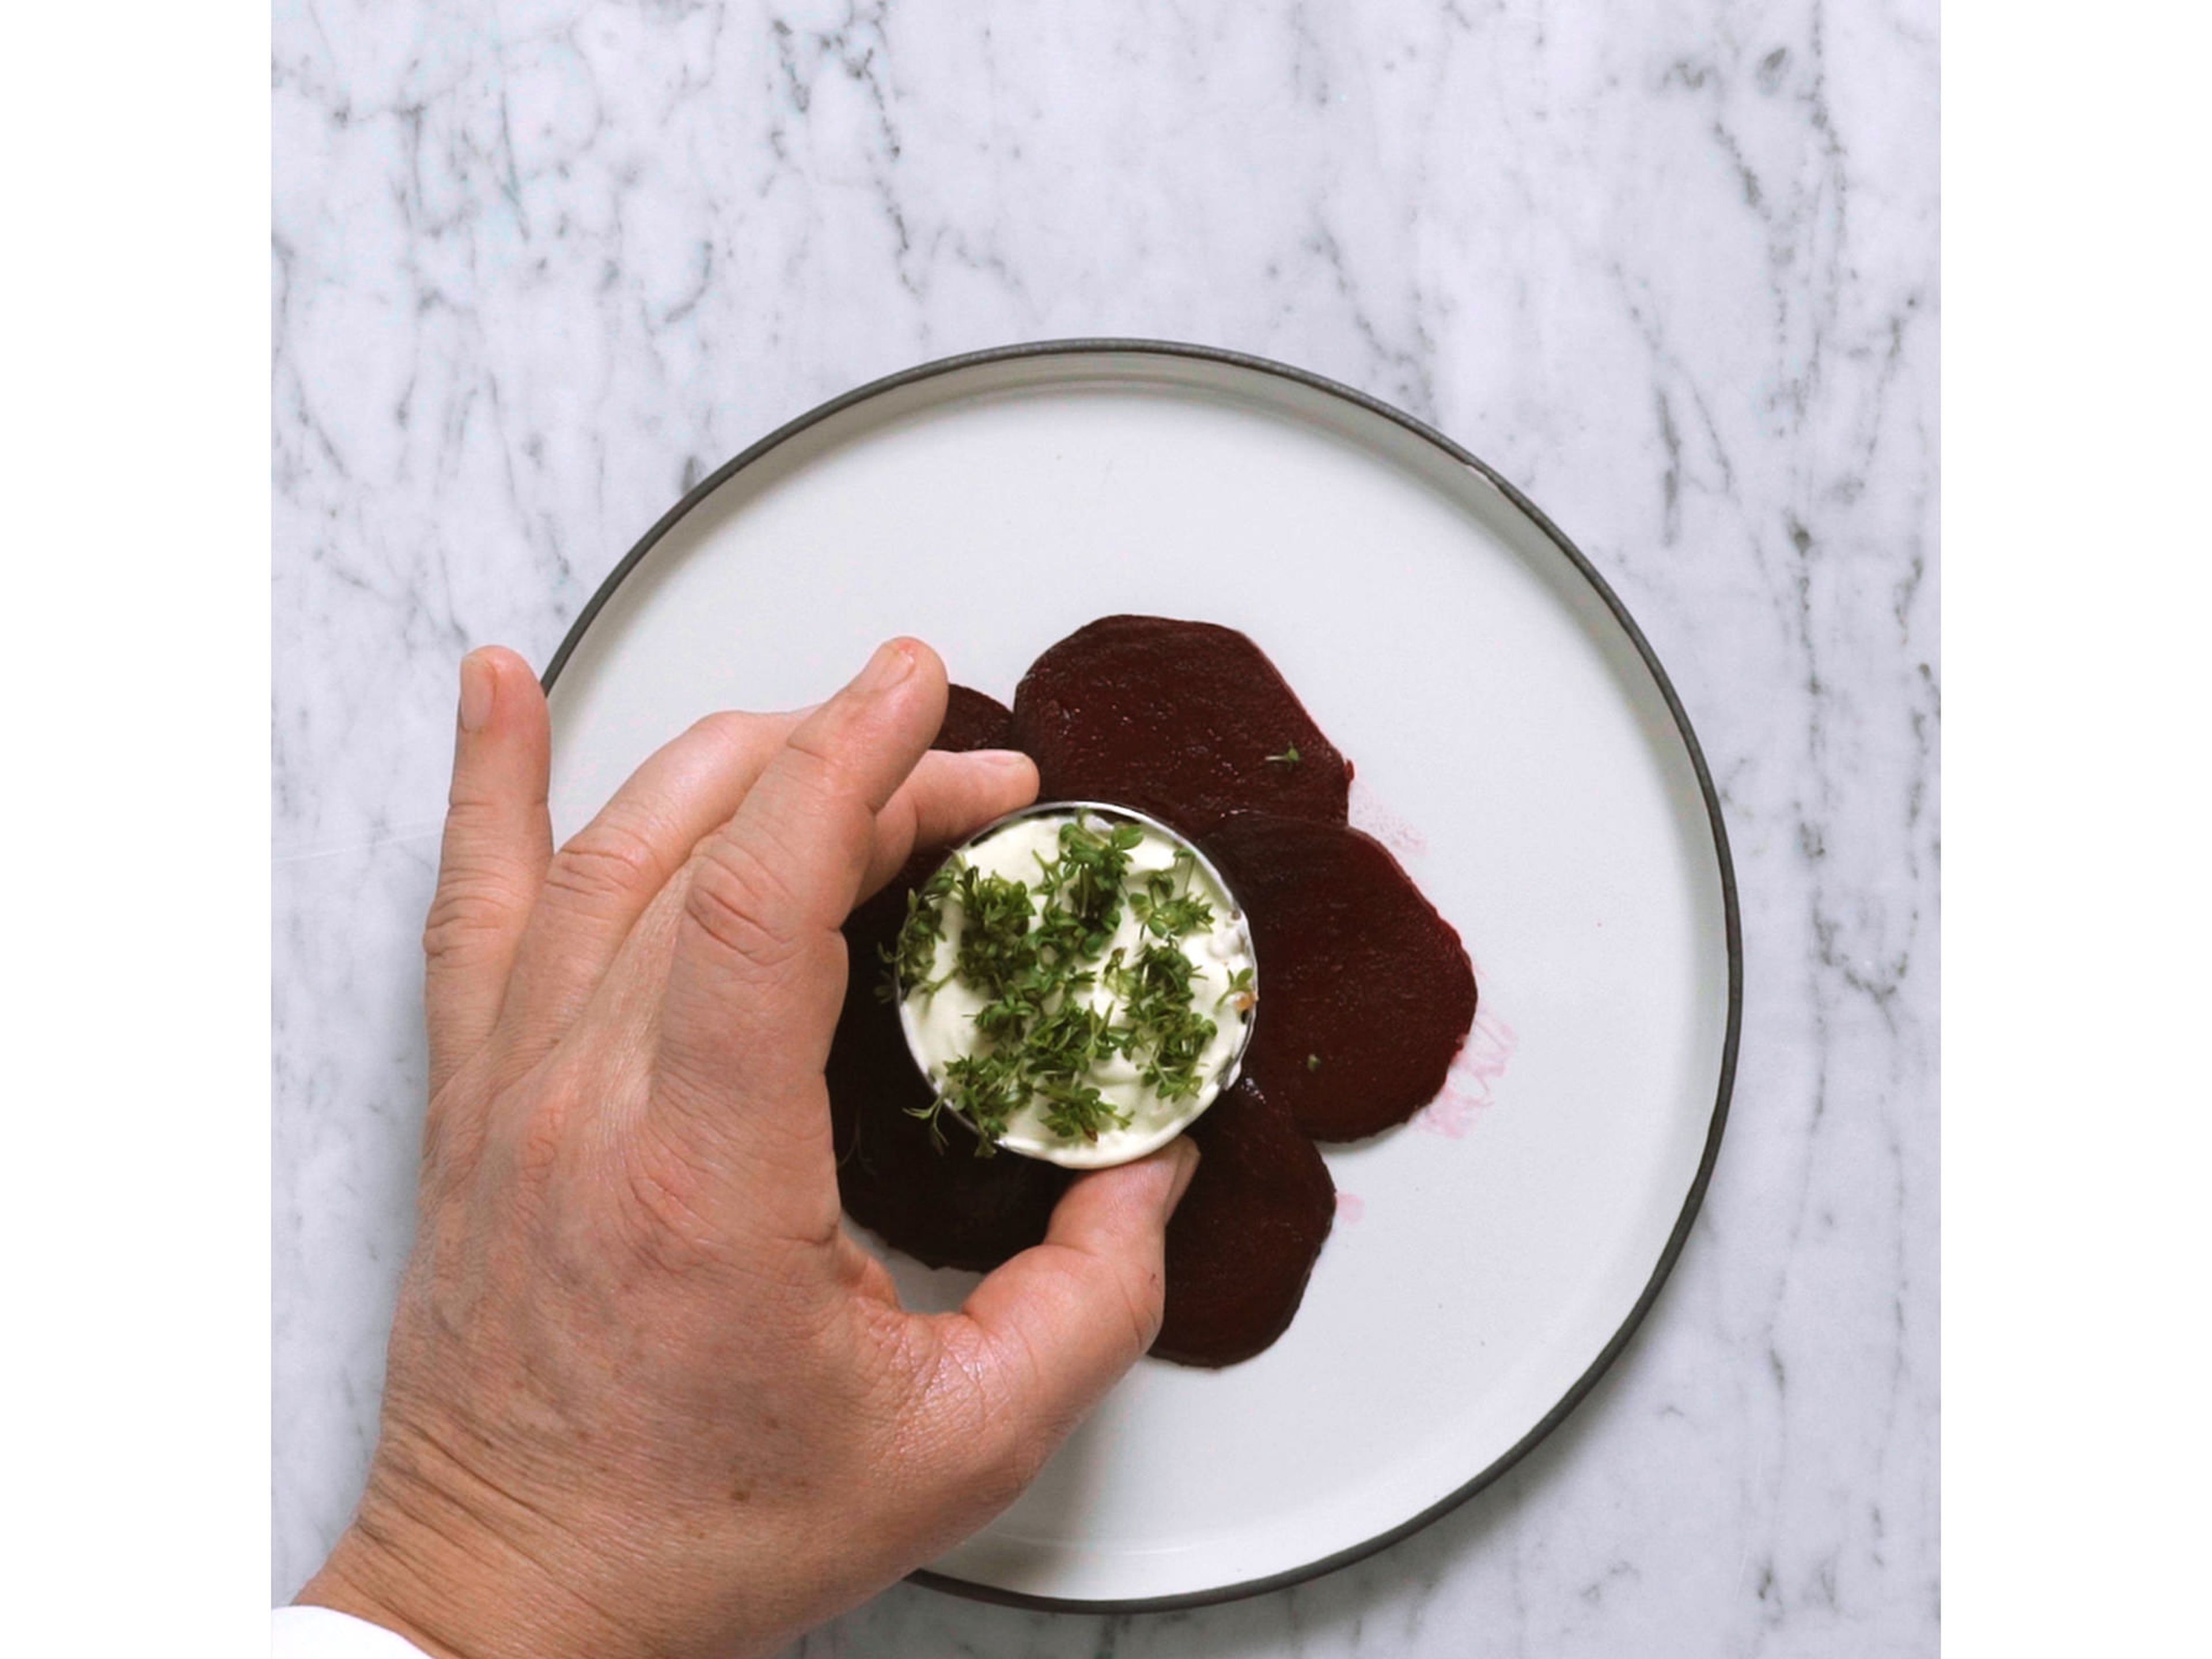 Arrange beetroot slices in a circle on serving plates. Place salmon tartare in the center, using a serving ring, and press down carefully. Spread wasabi cream on top. Carefully remove the serving ring.